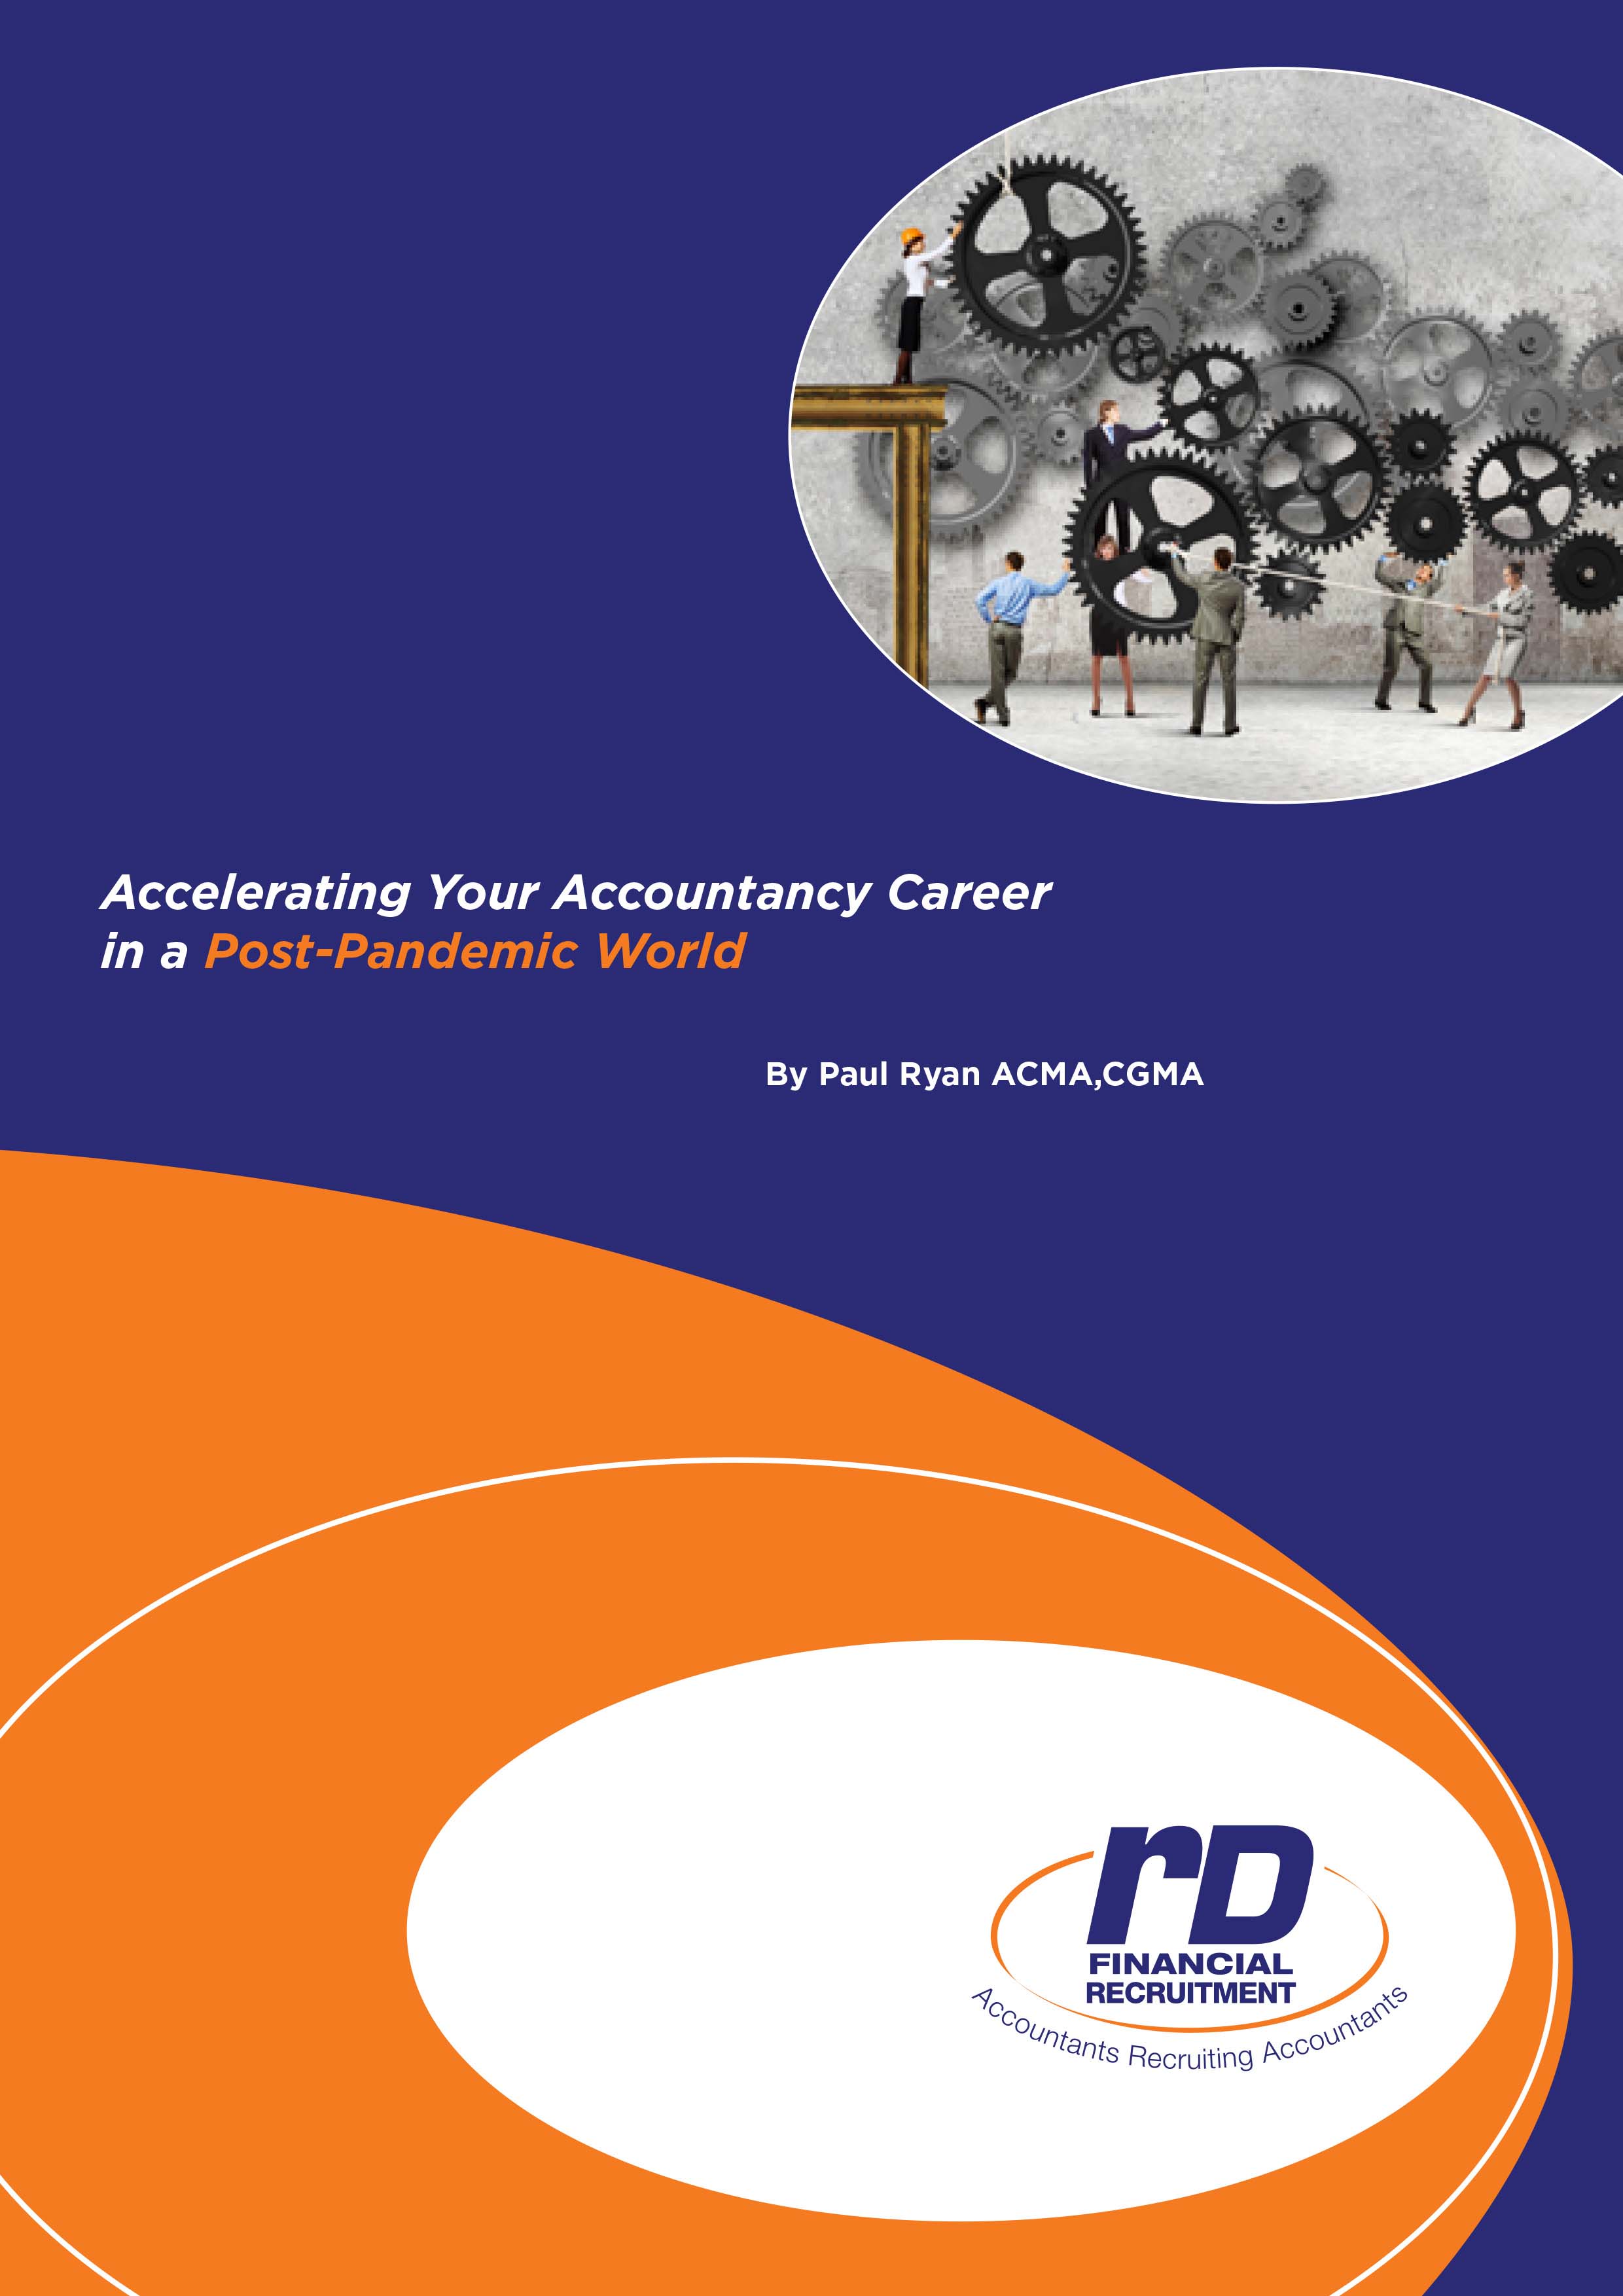 Accelerating_Your_Accountancy_Career_in_a_Post_Pandemic_World-1.jpg